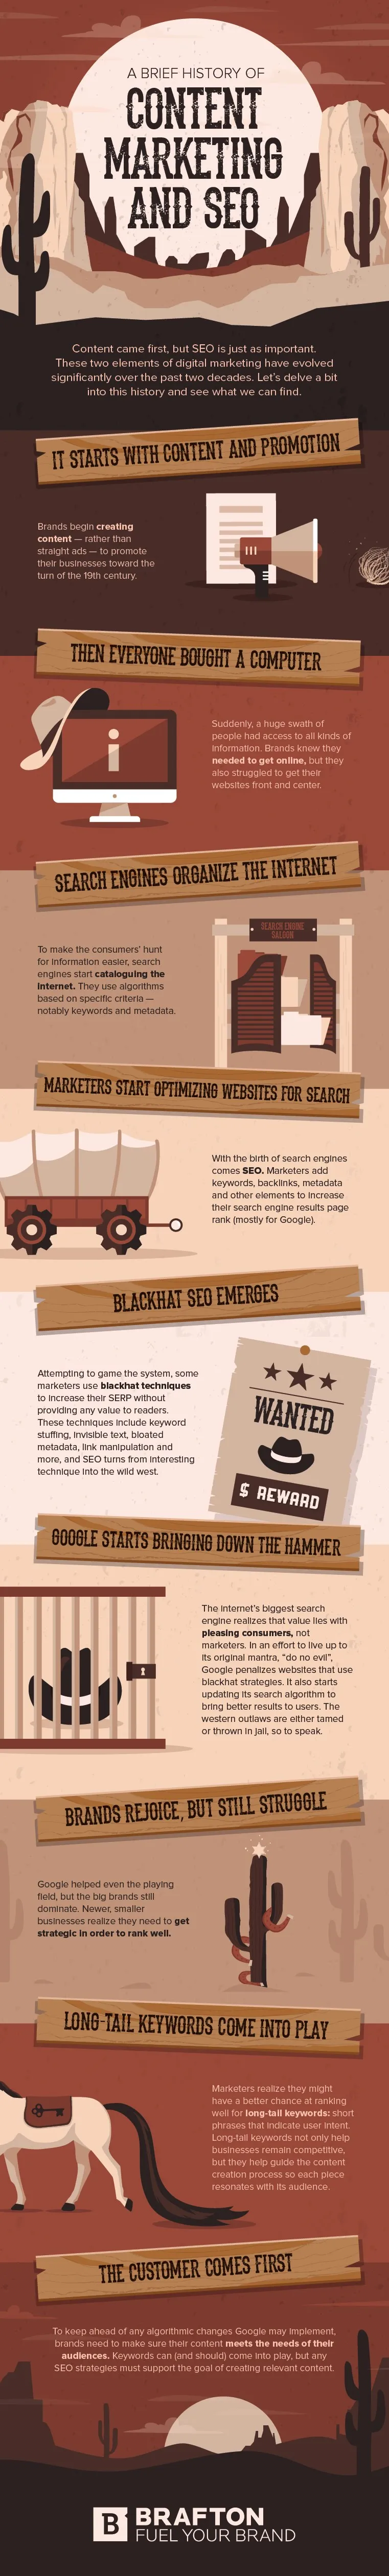 The History Of Content Marketing and SEO (Infographic)